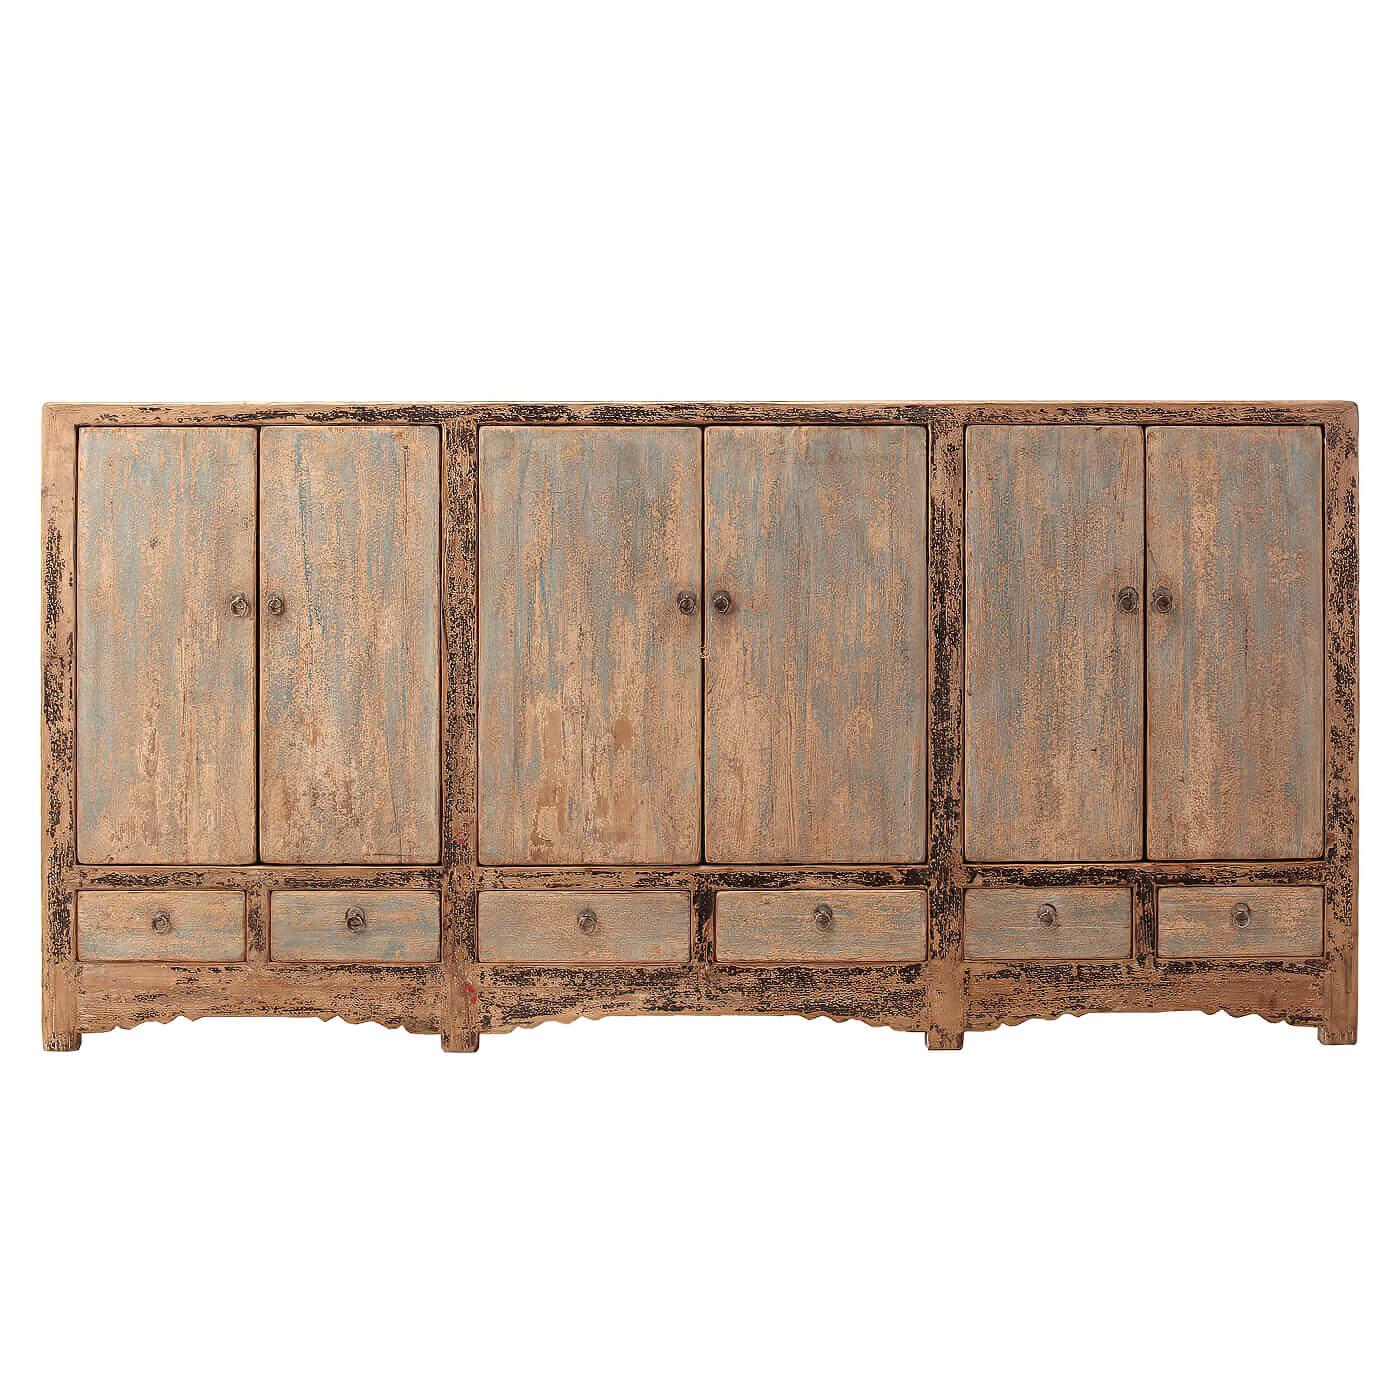 A rustic sideboard with six doors. This sideboard is a nice large size with six doors and three drawers accented with iron ring pull hardware. It is crafted in reclaimed pine and has a beautifully carved arch base. 

This piece has a unique